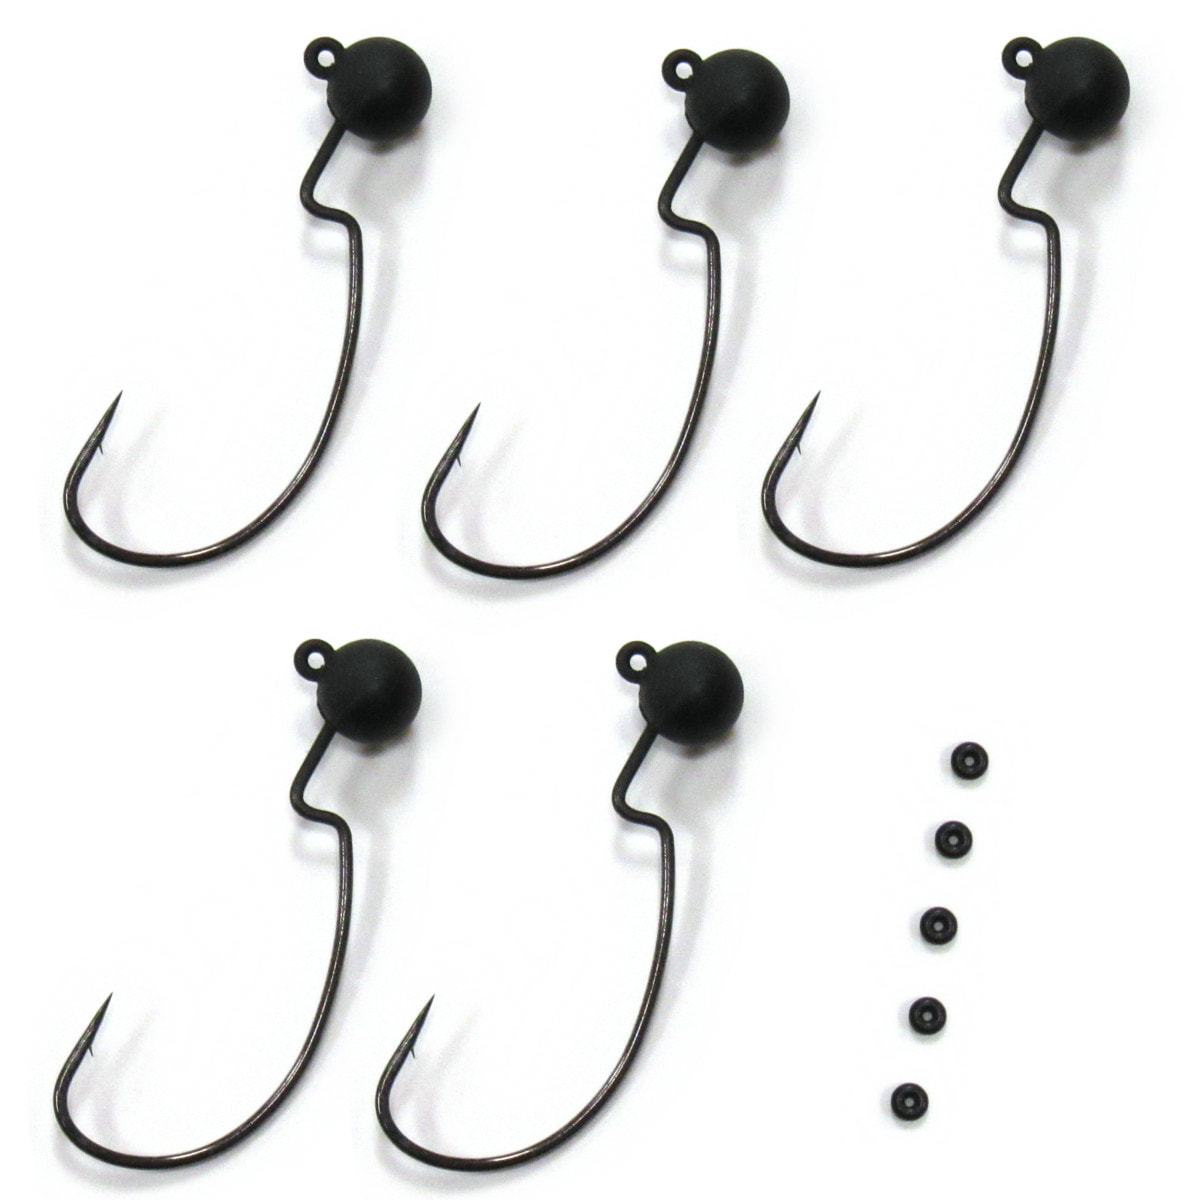 1/16 oz Ned Midwest Rig/Finesse Jig head 10PK With Strong 1/0 Owner 5313  Hook